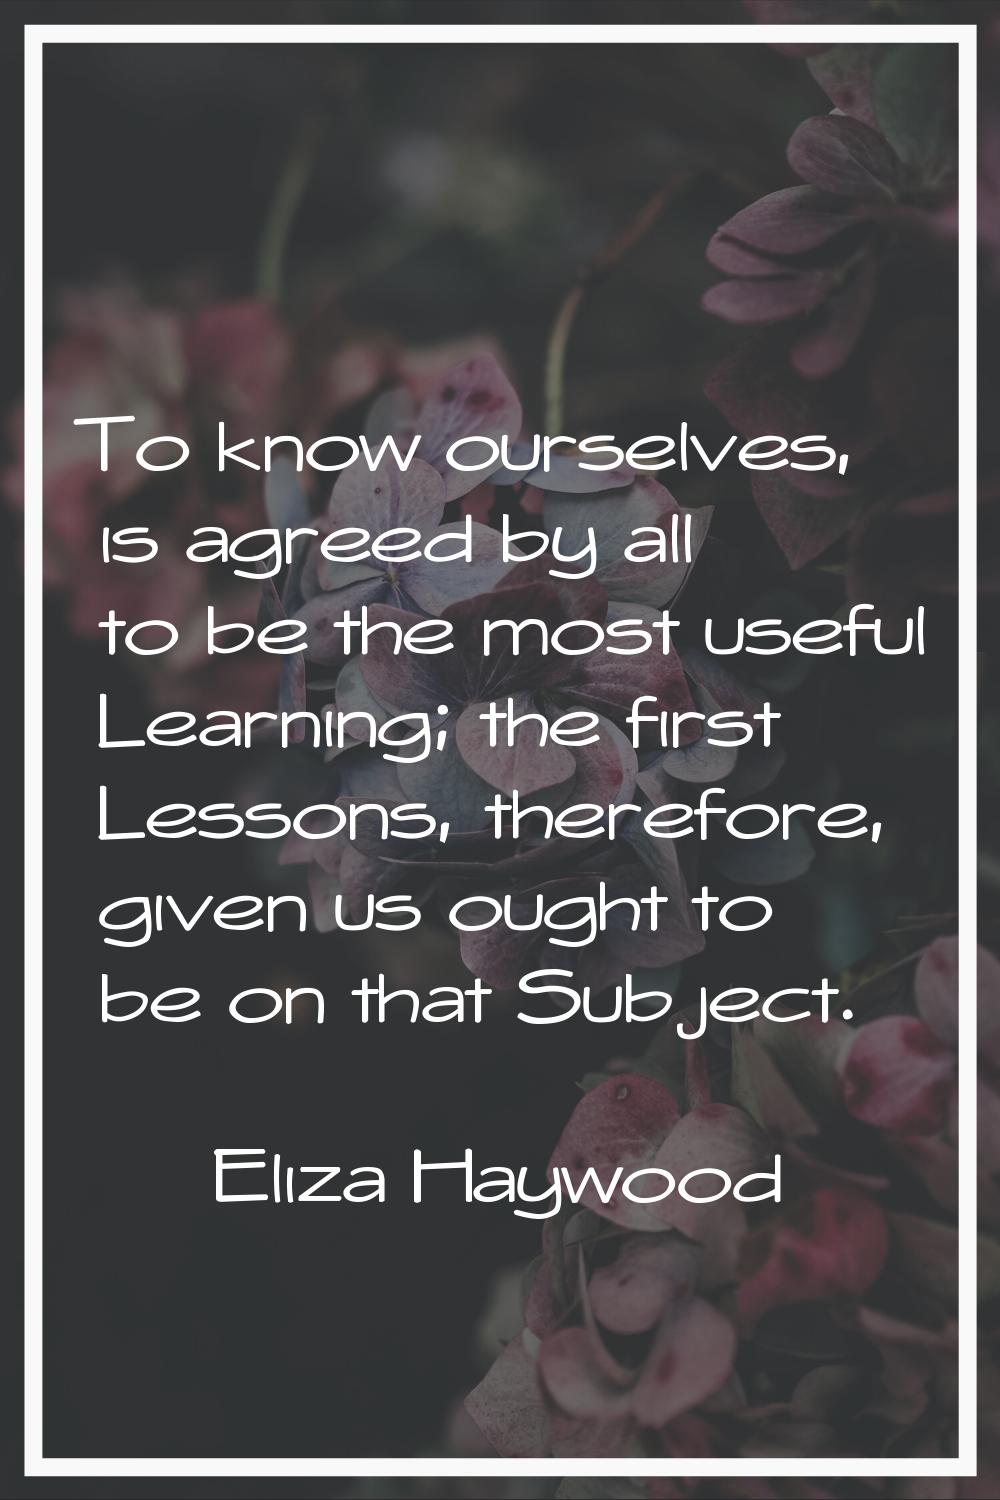 To know ourselves, is agreed by all to be the most useful Learning; the first Lessons, therefore, g